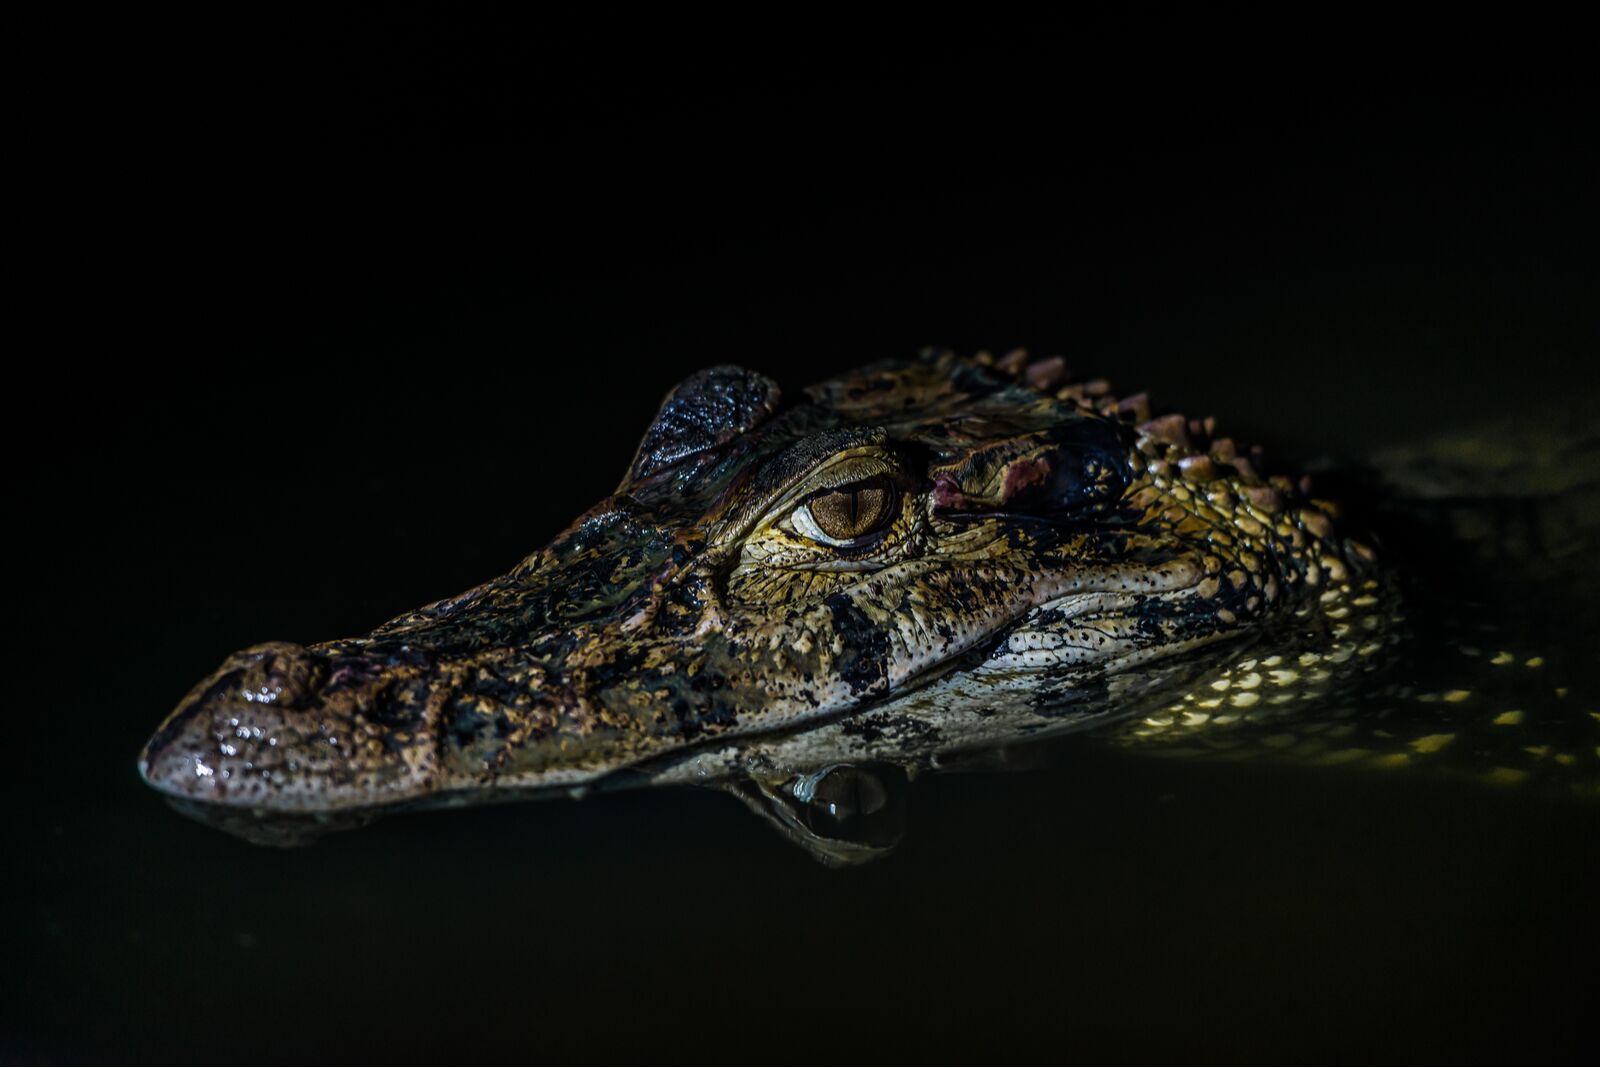 Black caiman at night in the Amazon